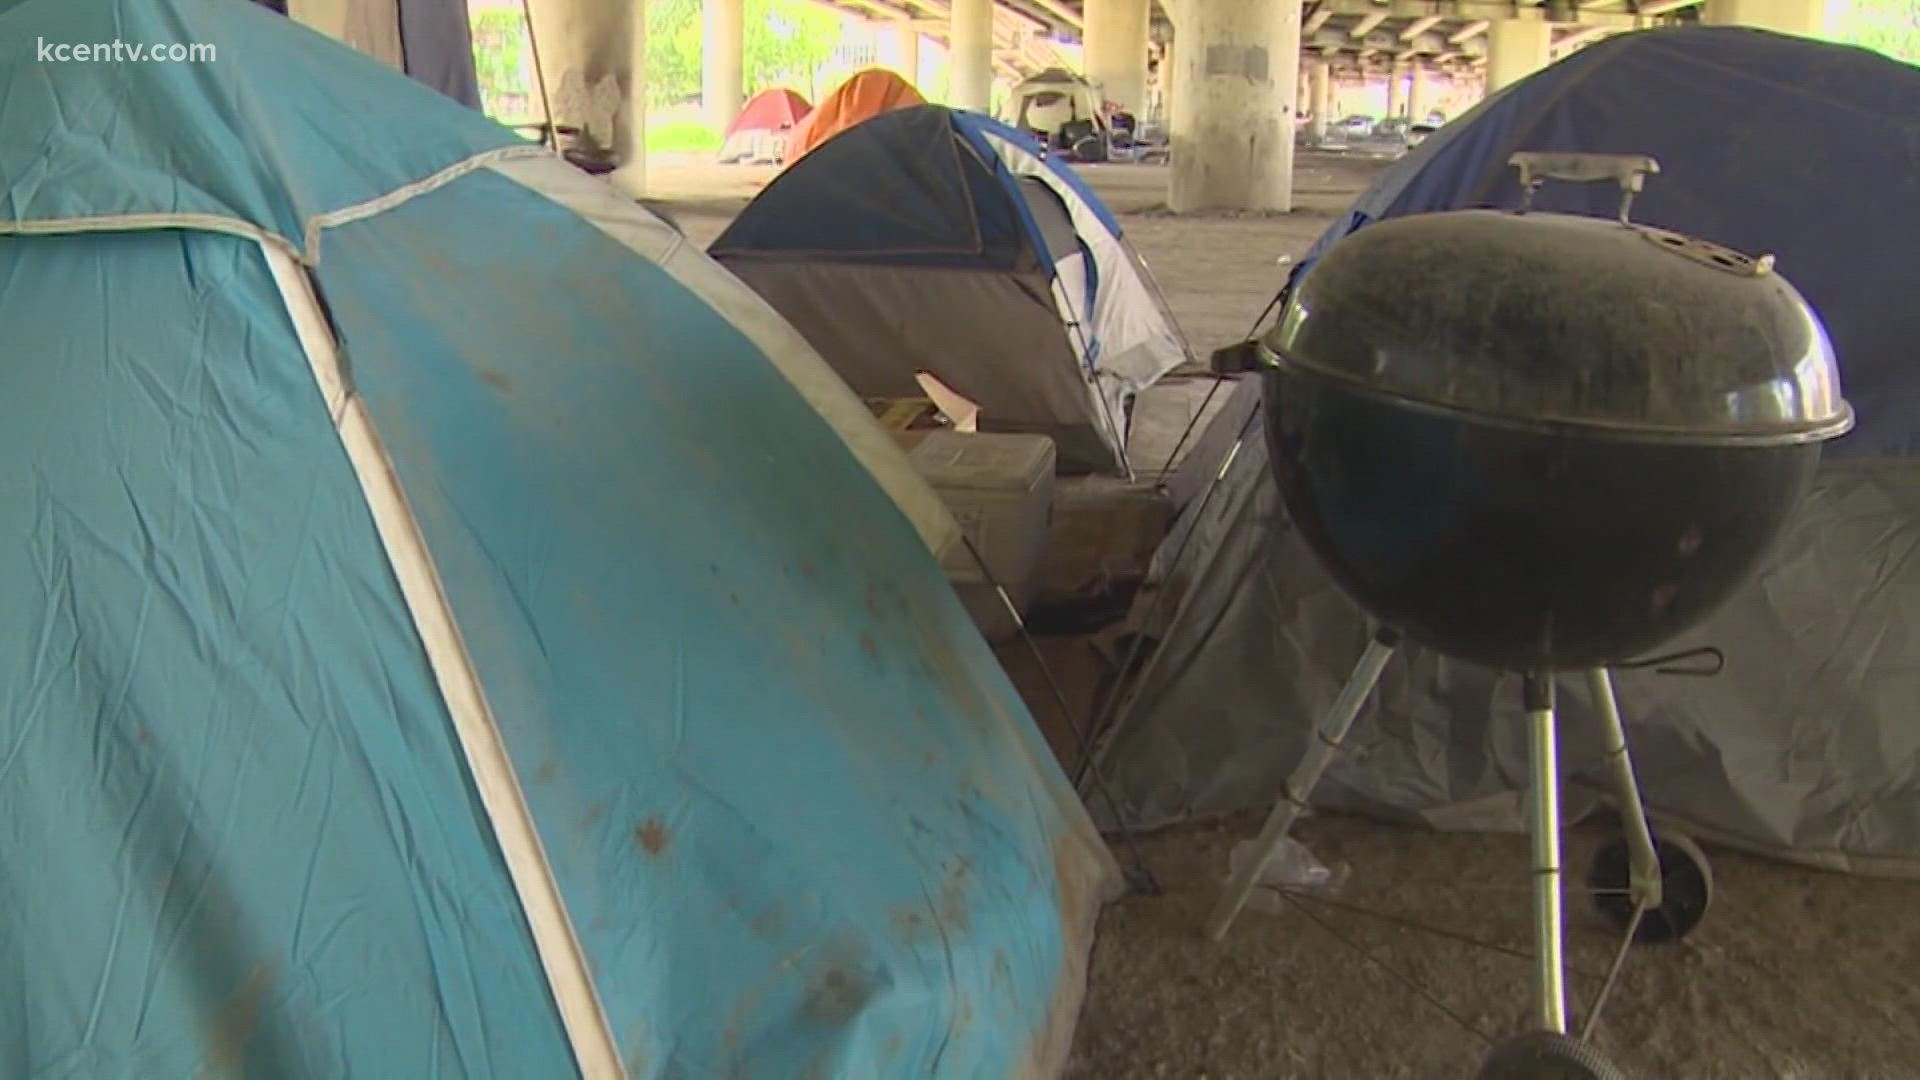 The cities of Temple and Killeen are teaming up to fight homelessness.